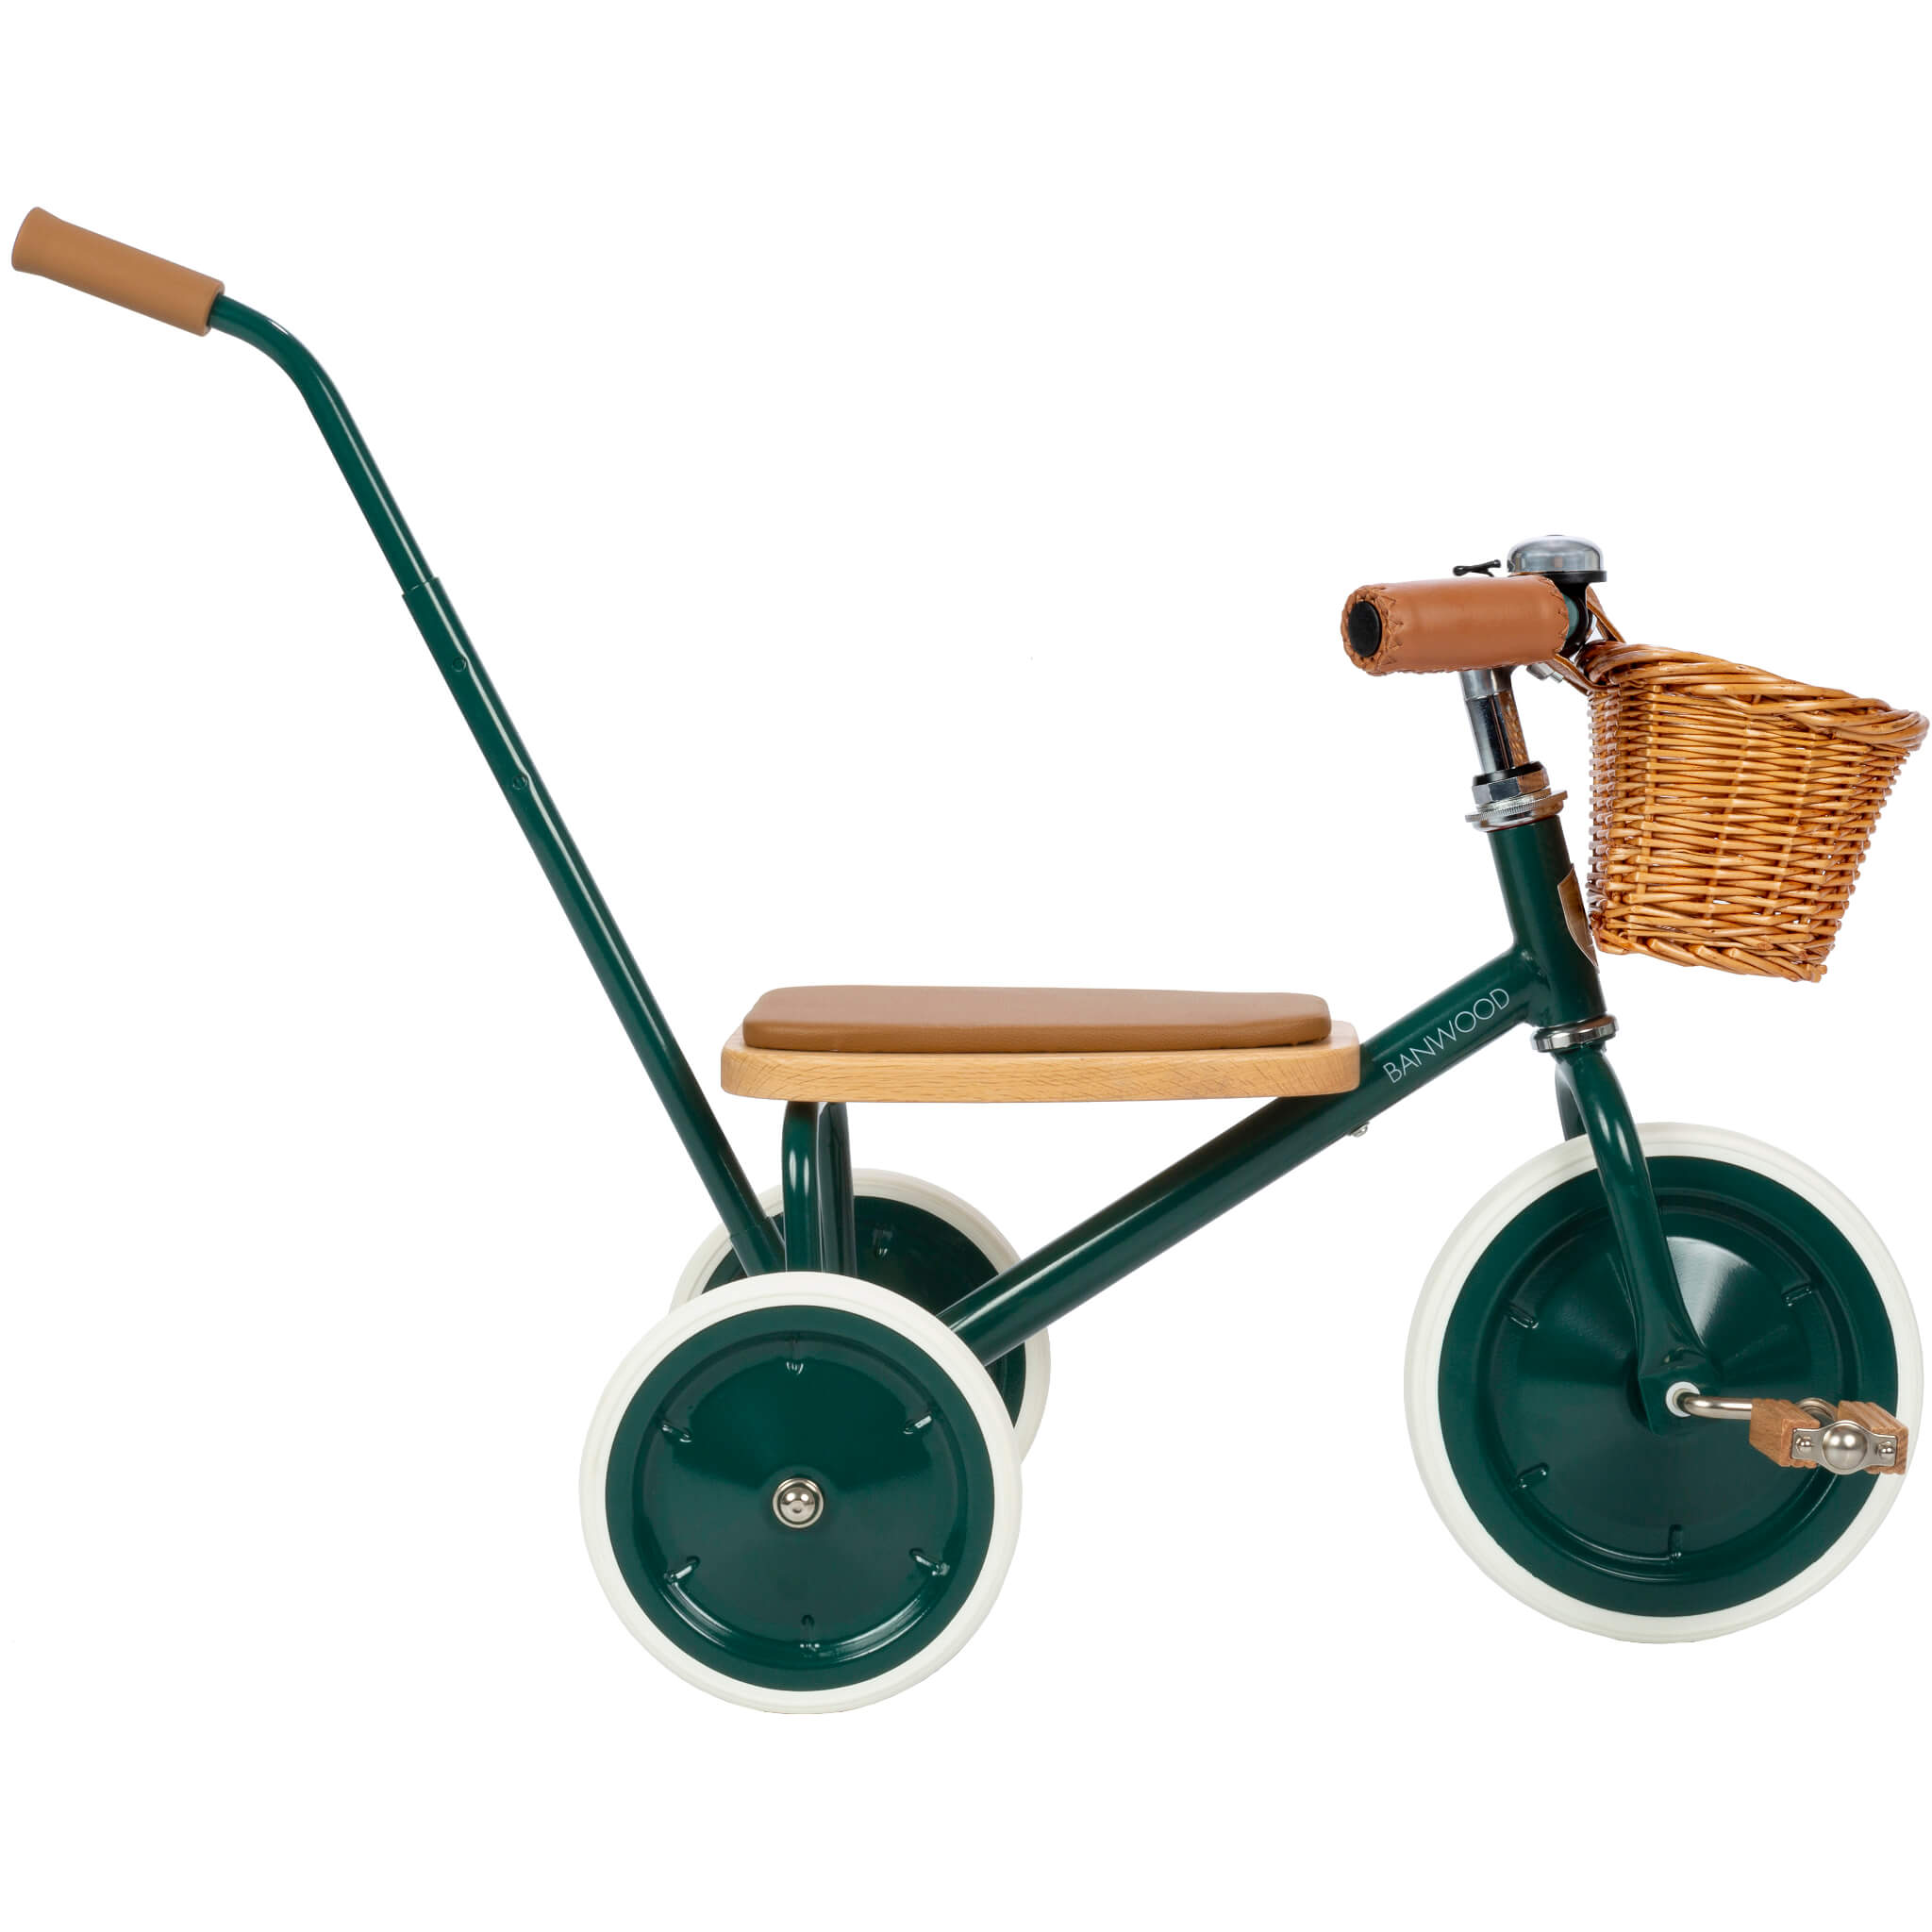 Banwood Children's Trike in Green with Push Bar